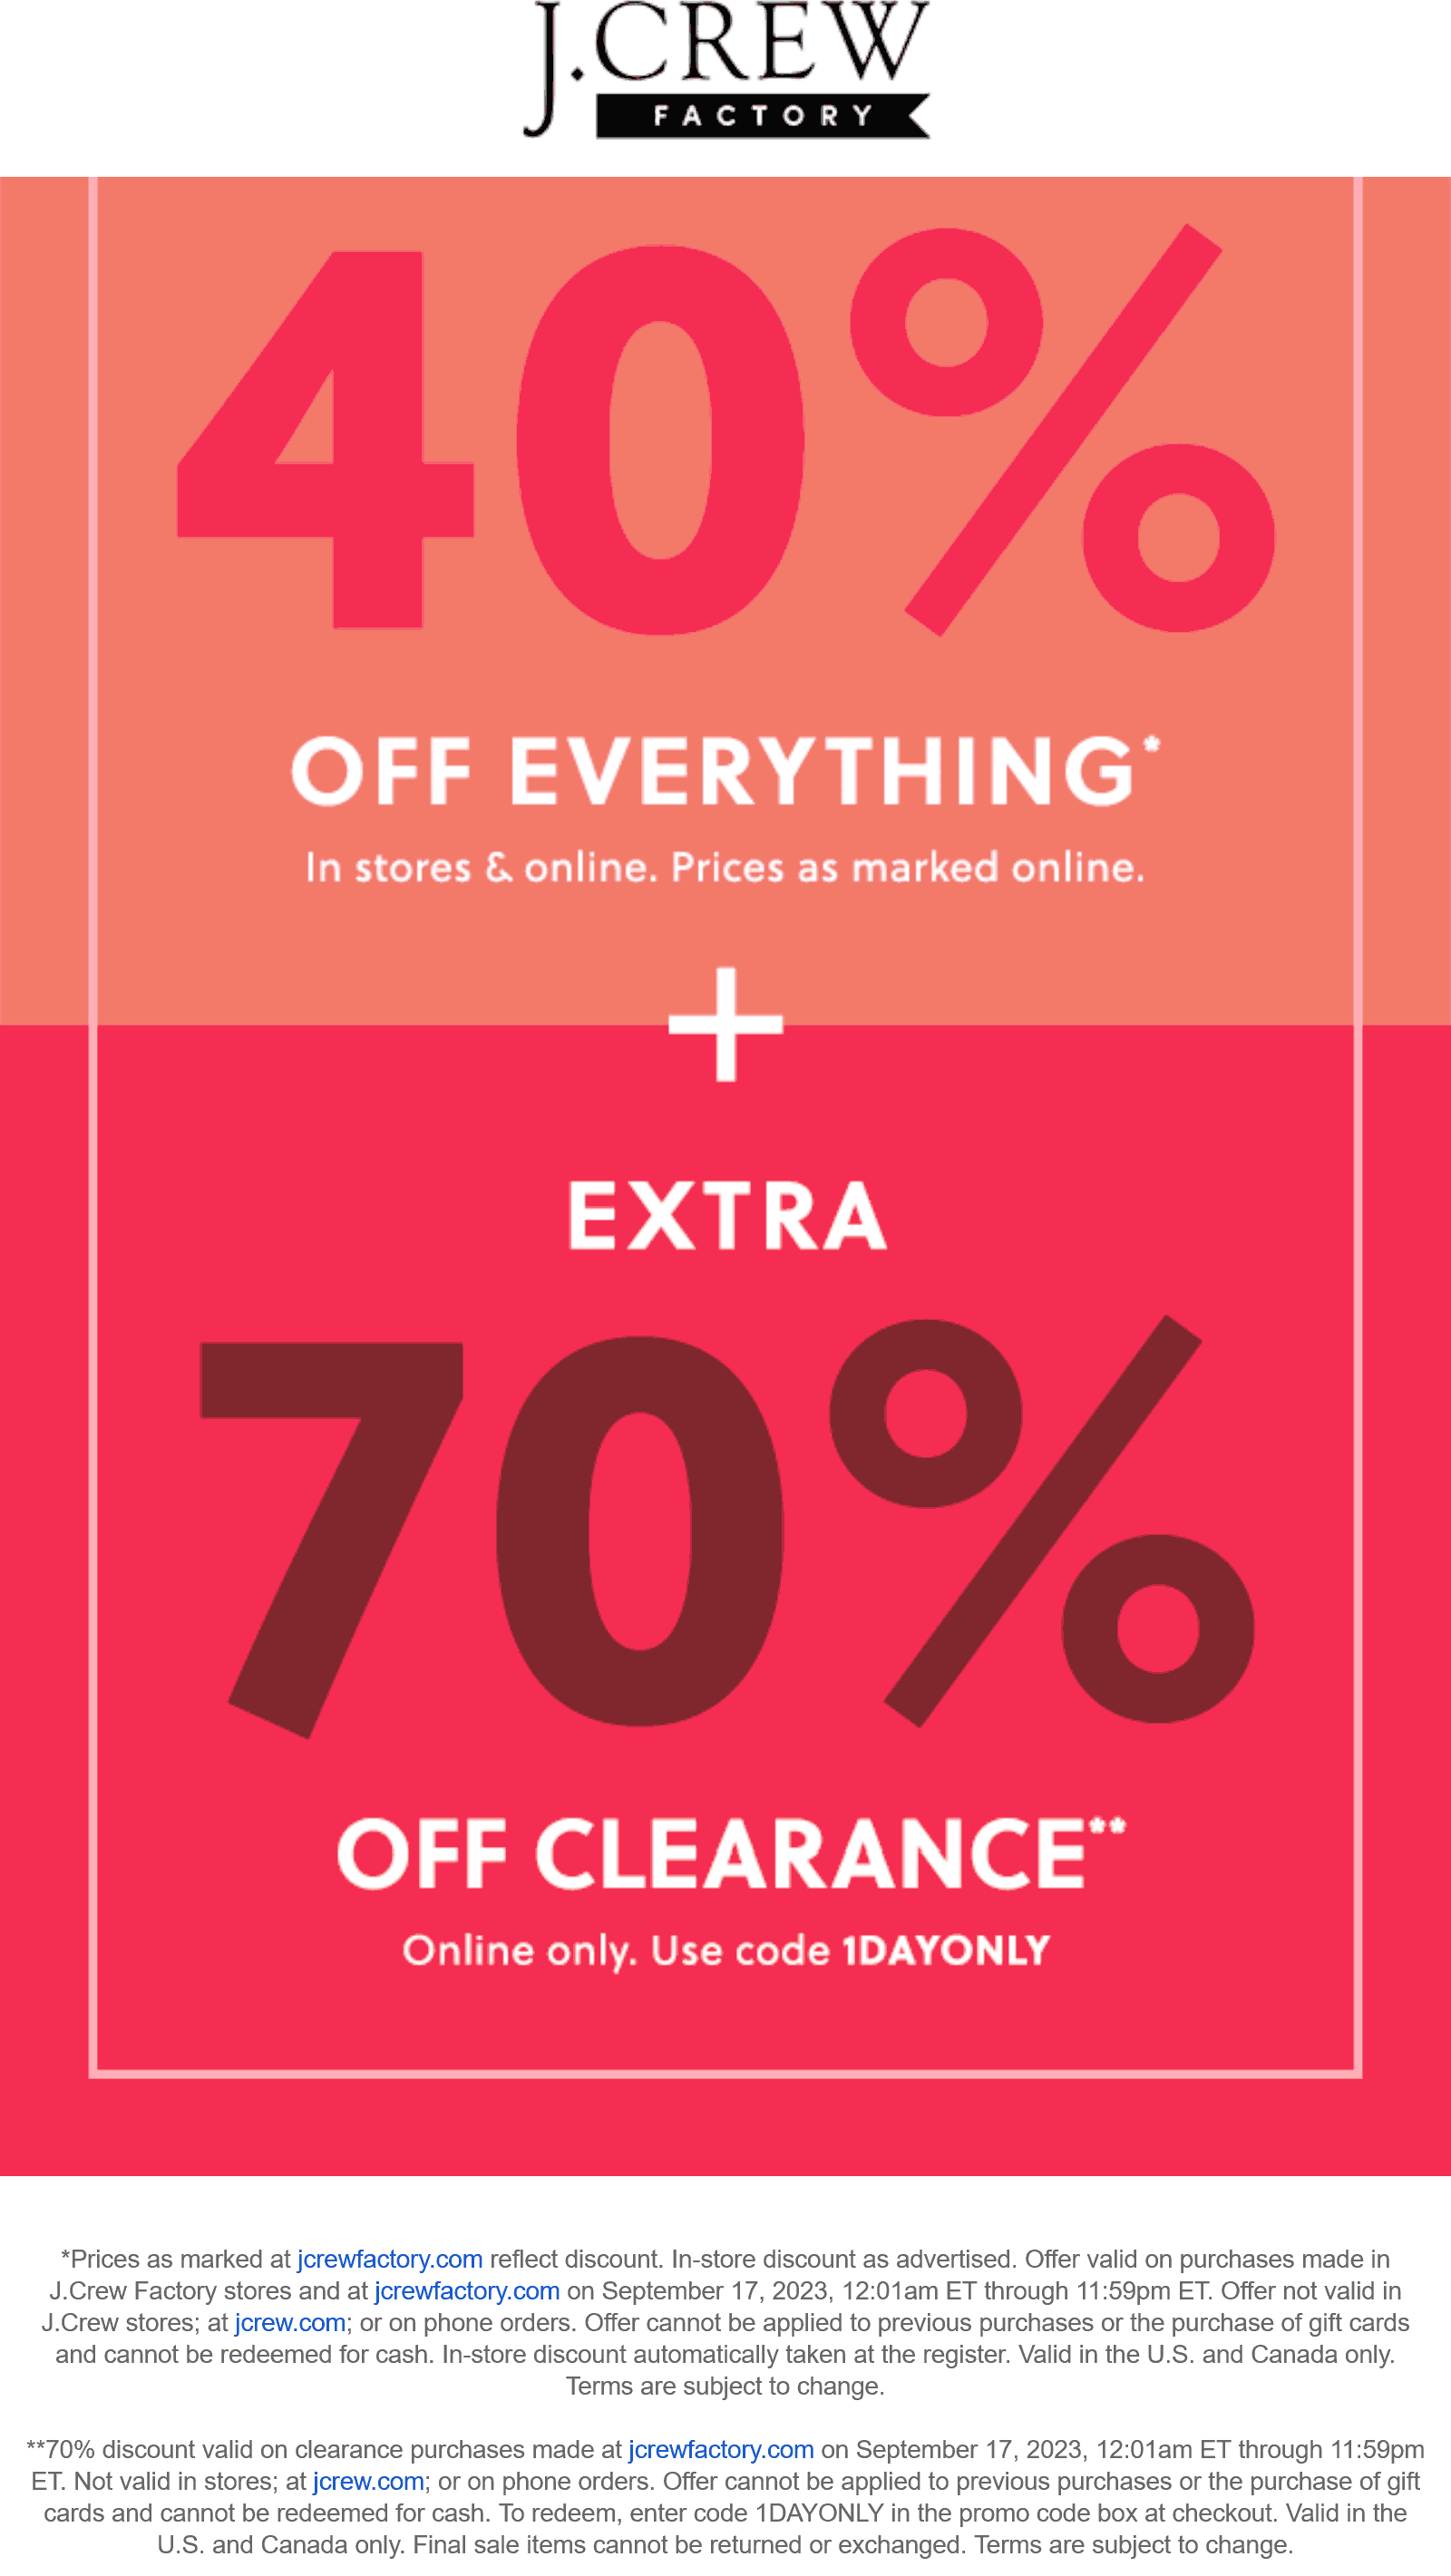 J.Crew Factory stores Coupon  40% off everything & more today at J.Crew Factory, or online via promo code 1DAYONLY #jcrewfactory 